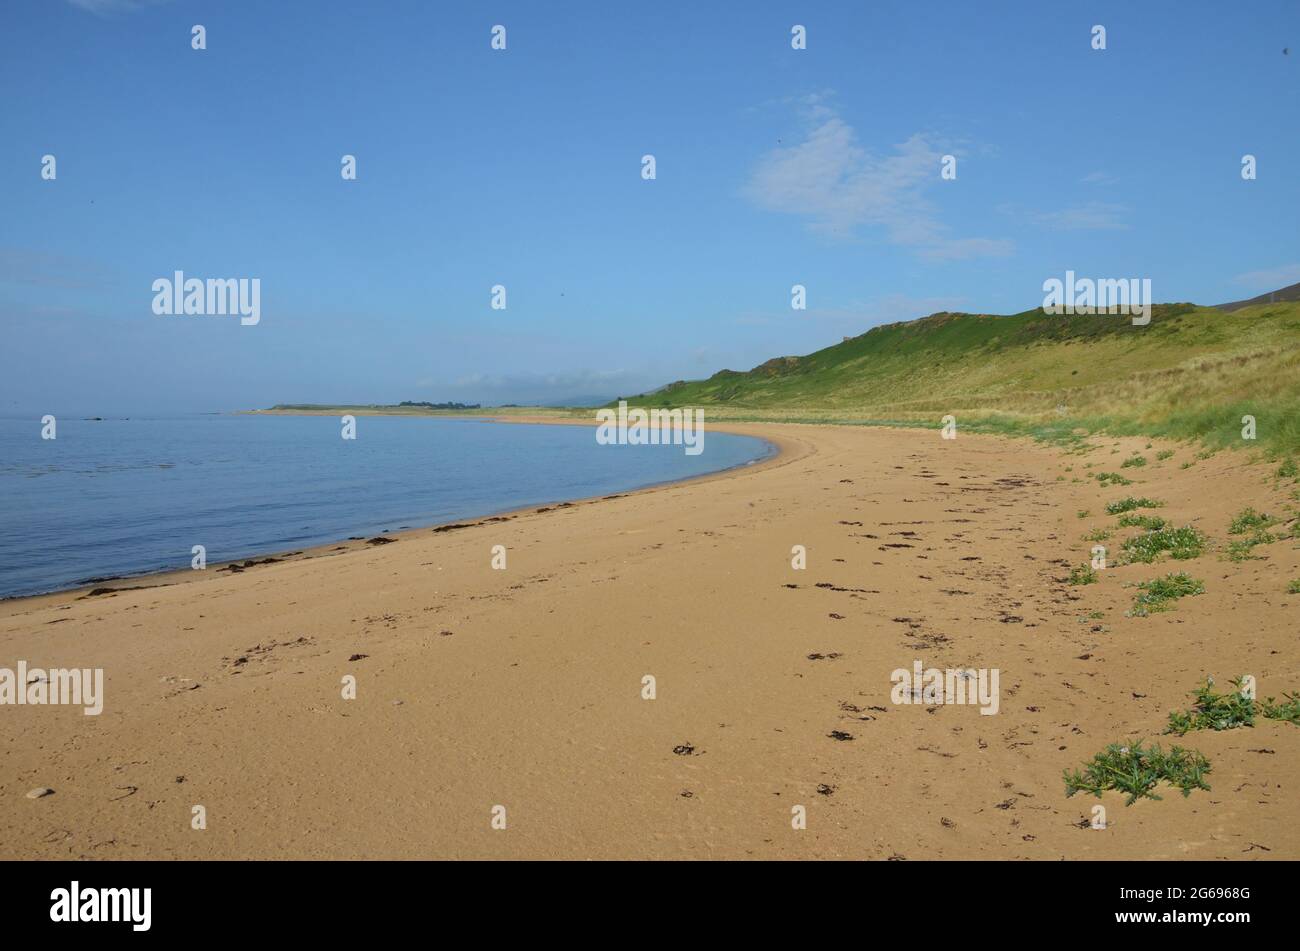 The beach at Loth on the east coast of Scotland. Stock Photo